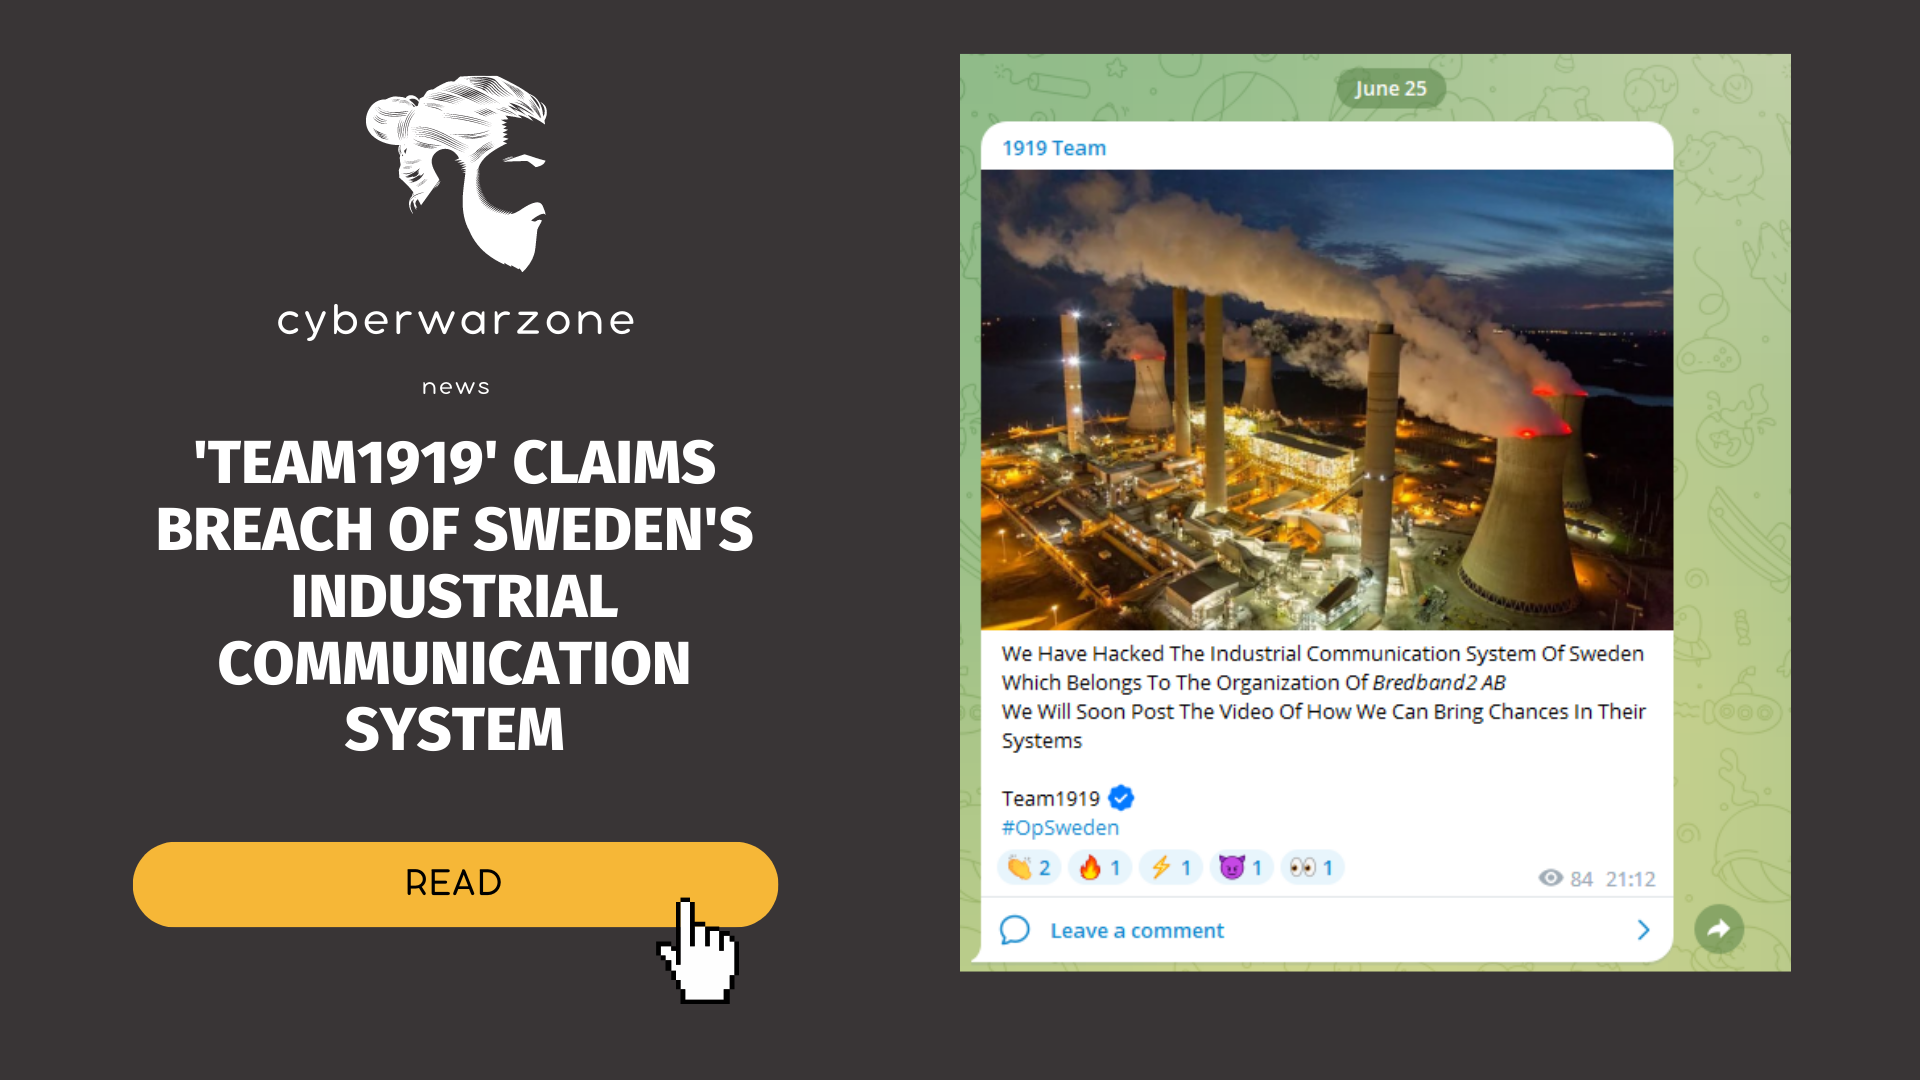 'Team1919' Claims Breach of Sweden's Industrial Communication System